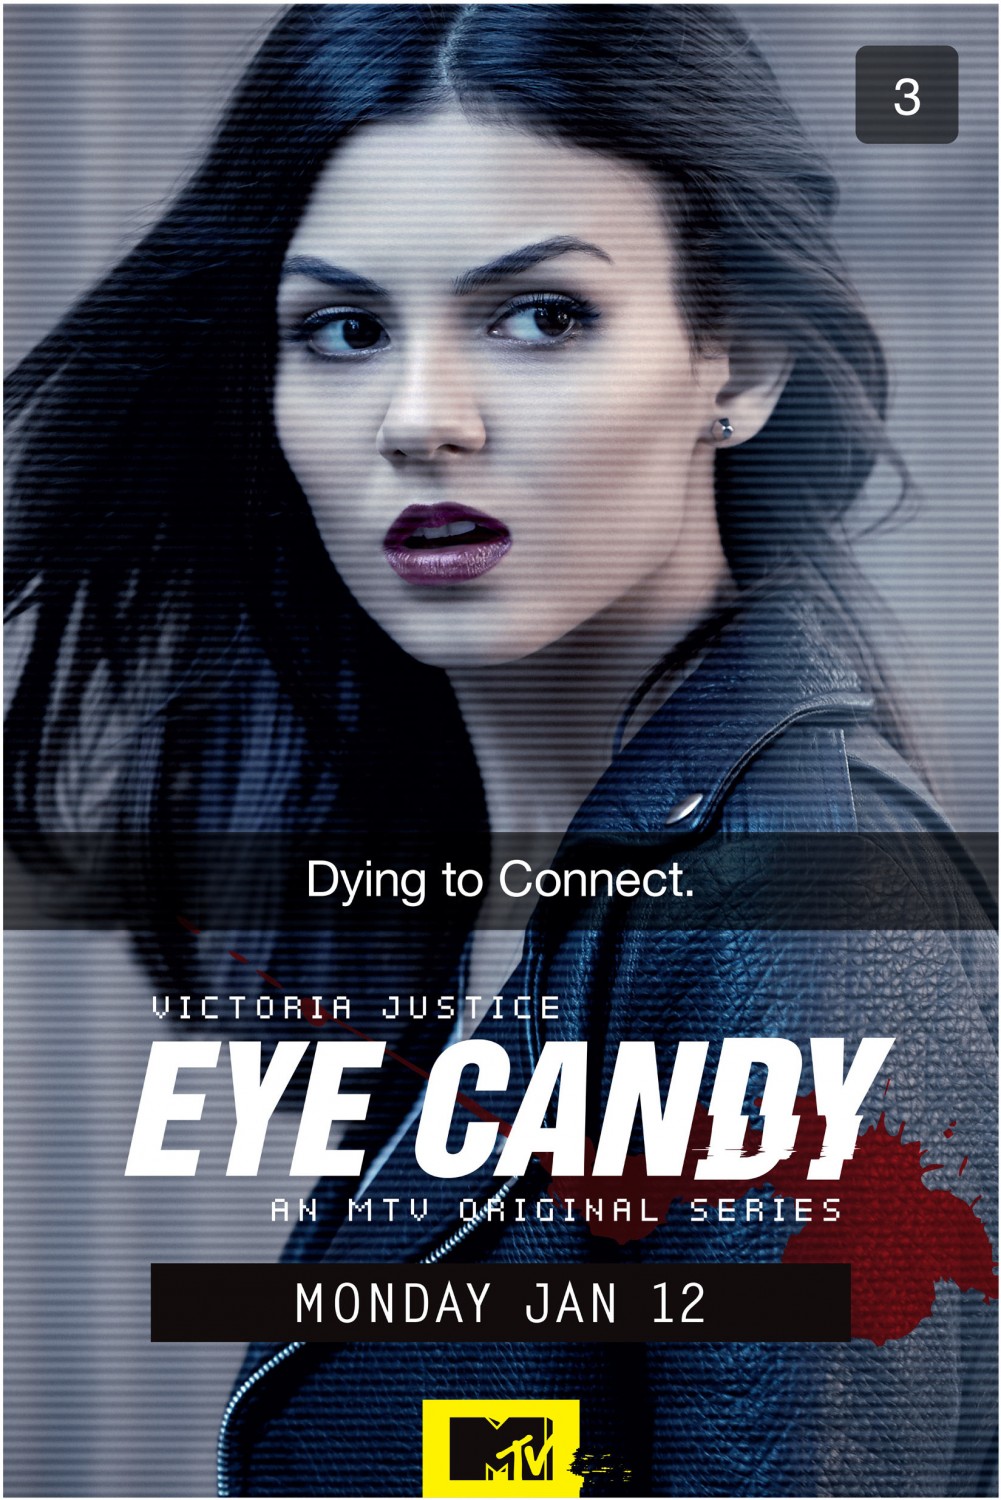 Extra Large TV Poster Image for Eye Candy 